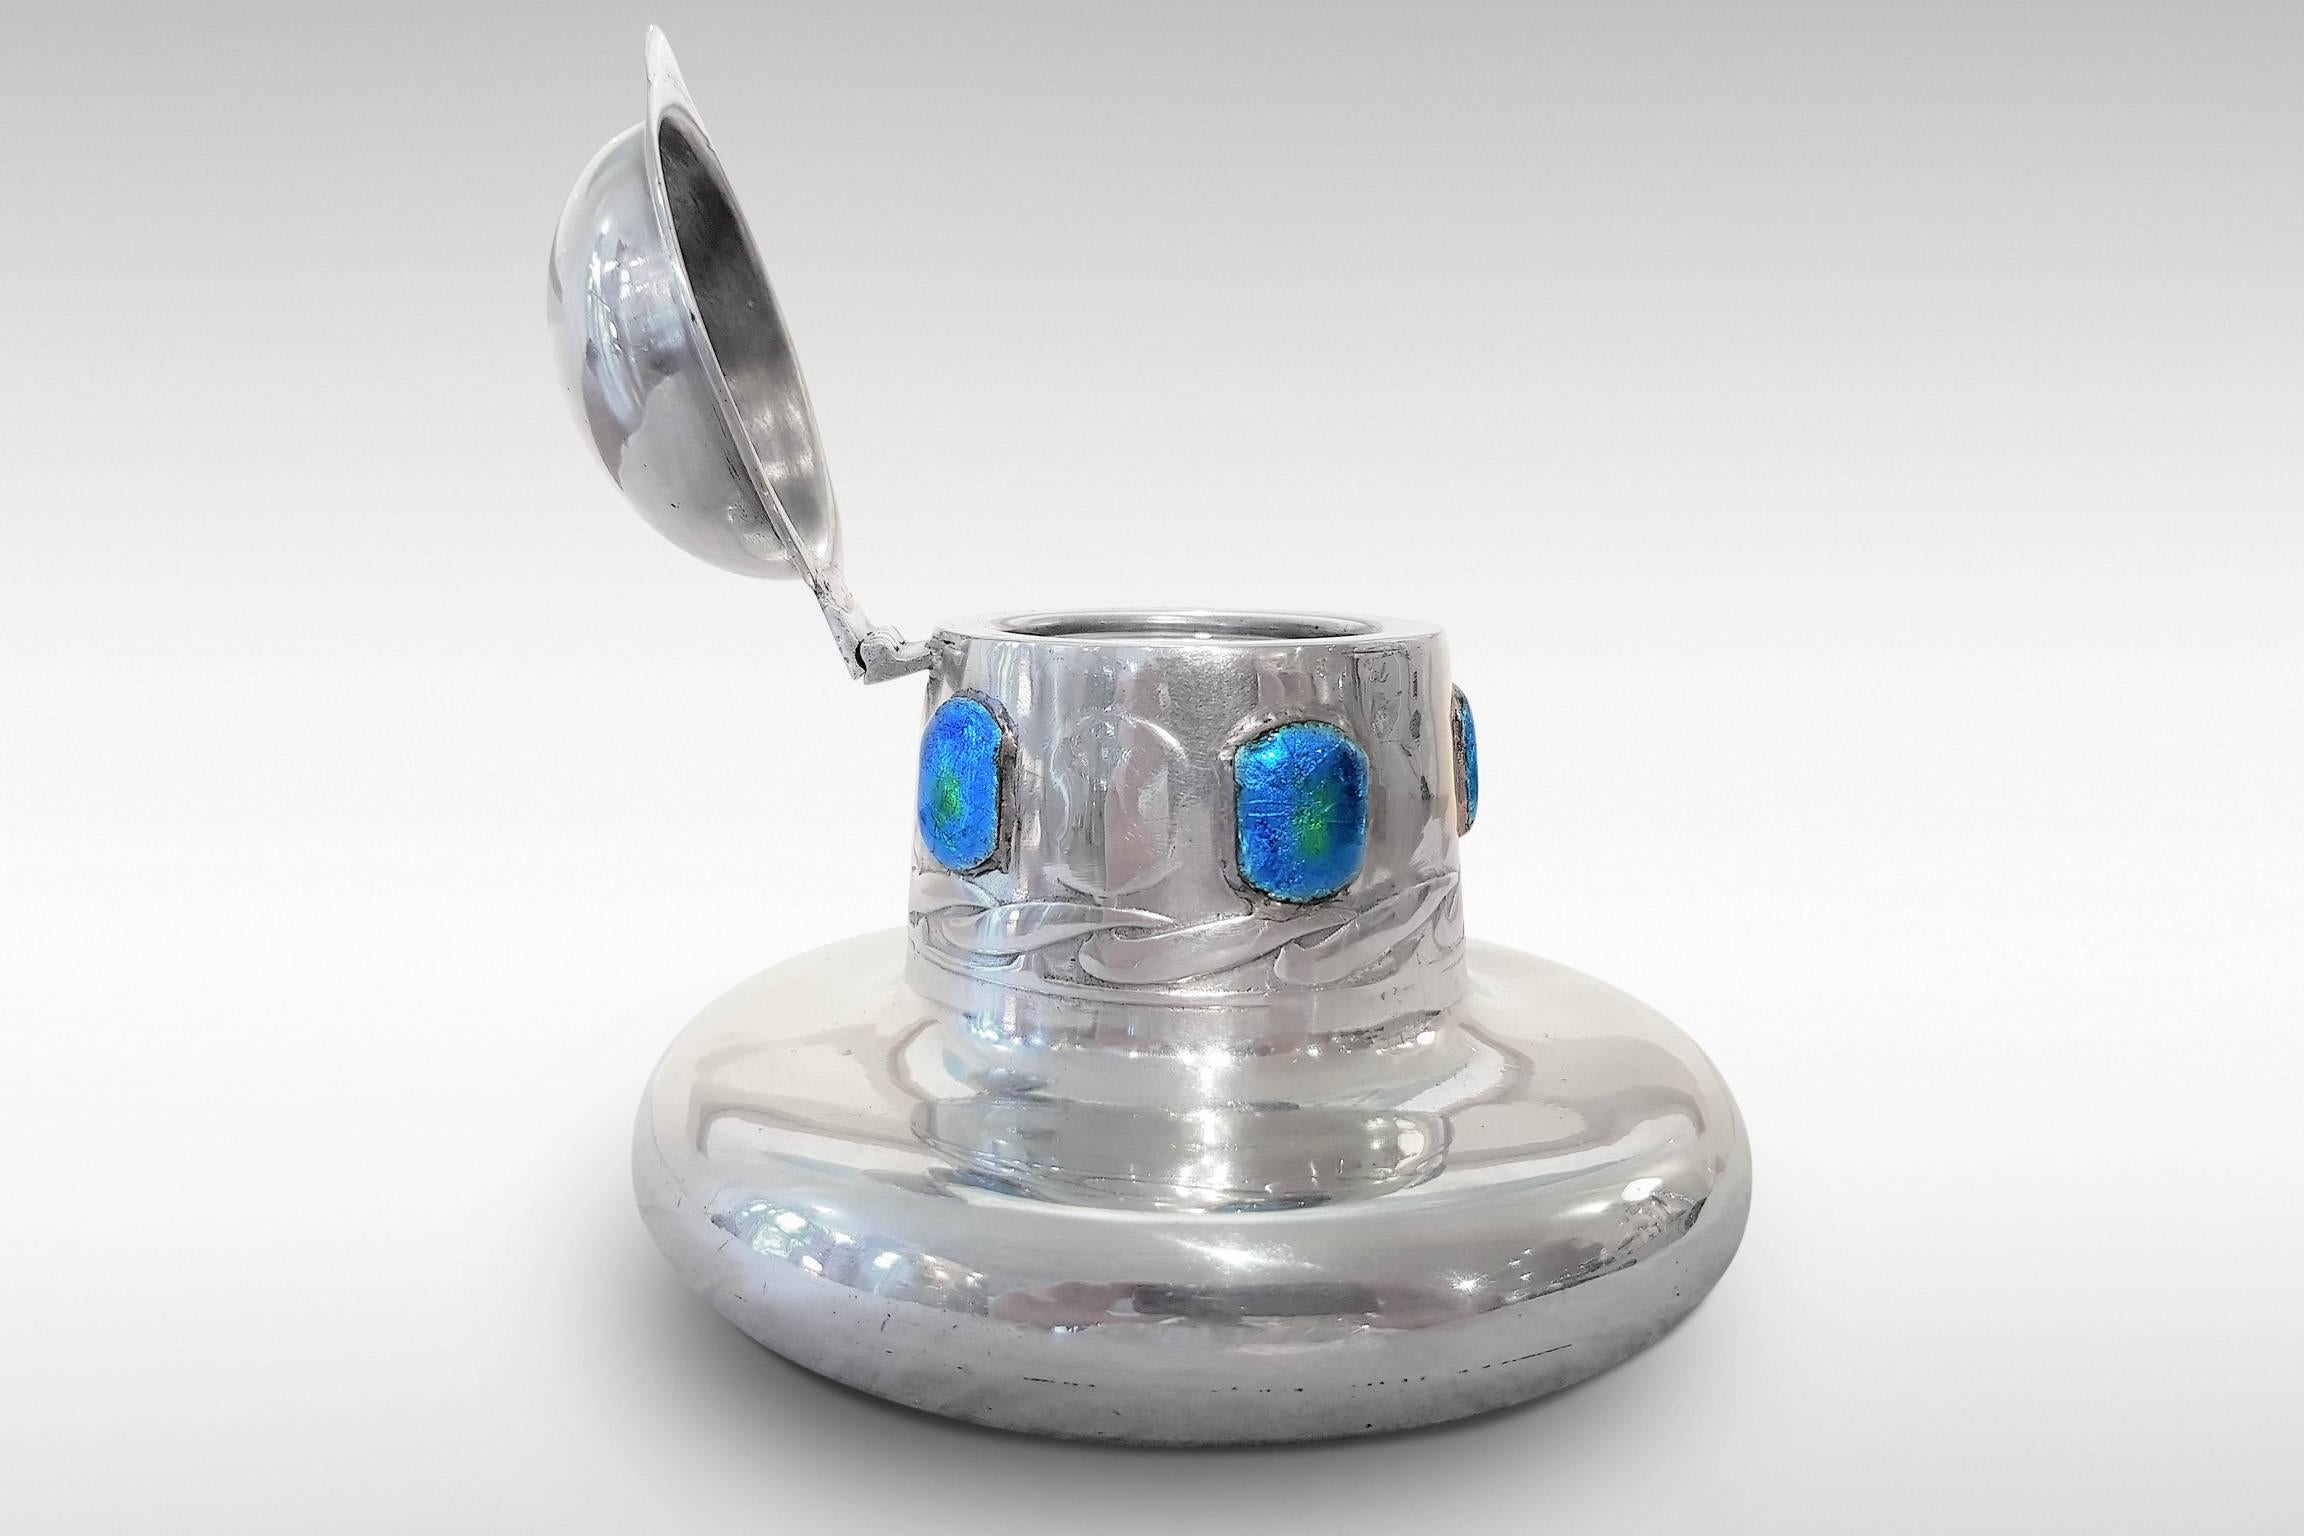 British Archibald Knox for Liberty: a 'Tudric' Pewter Inkwell with Enamel Decoration